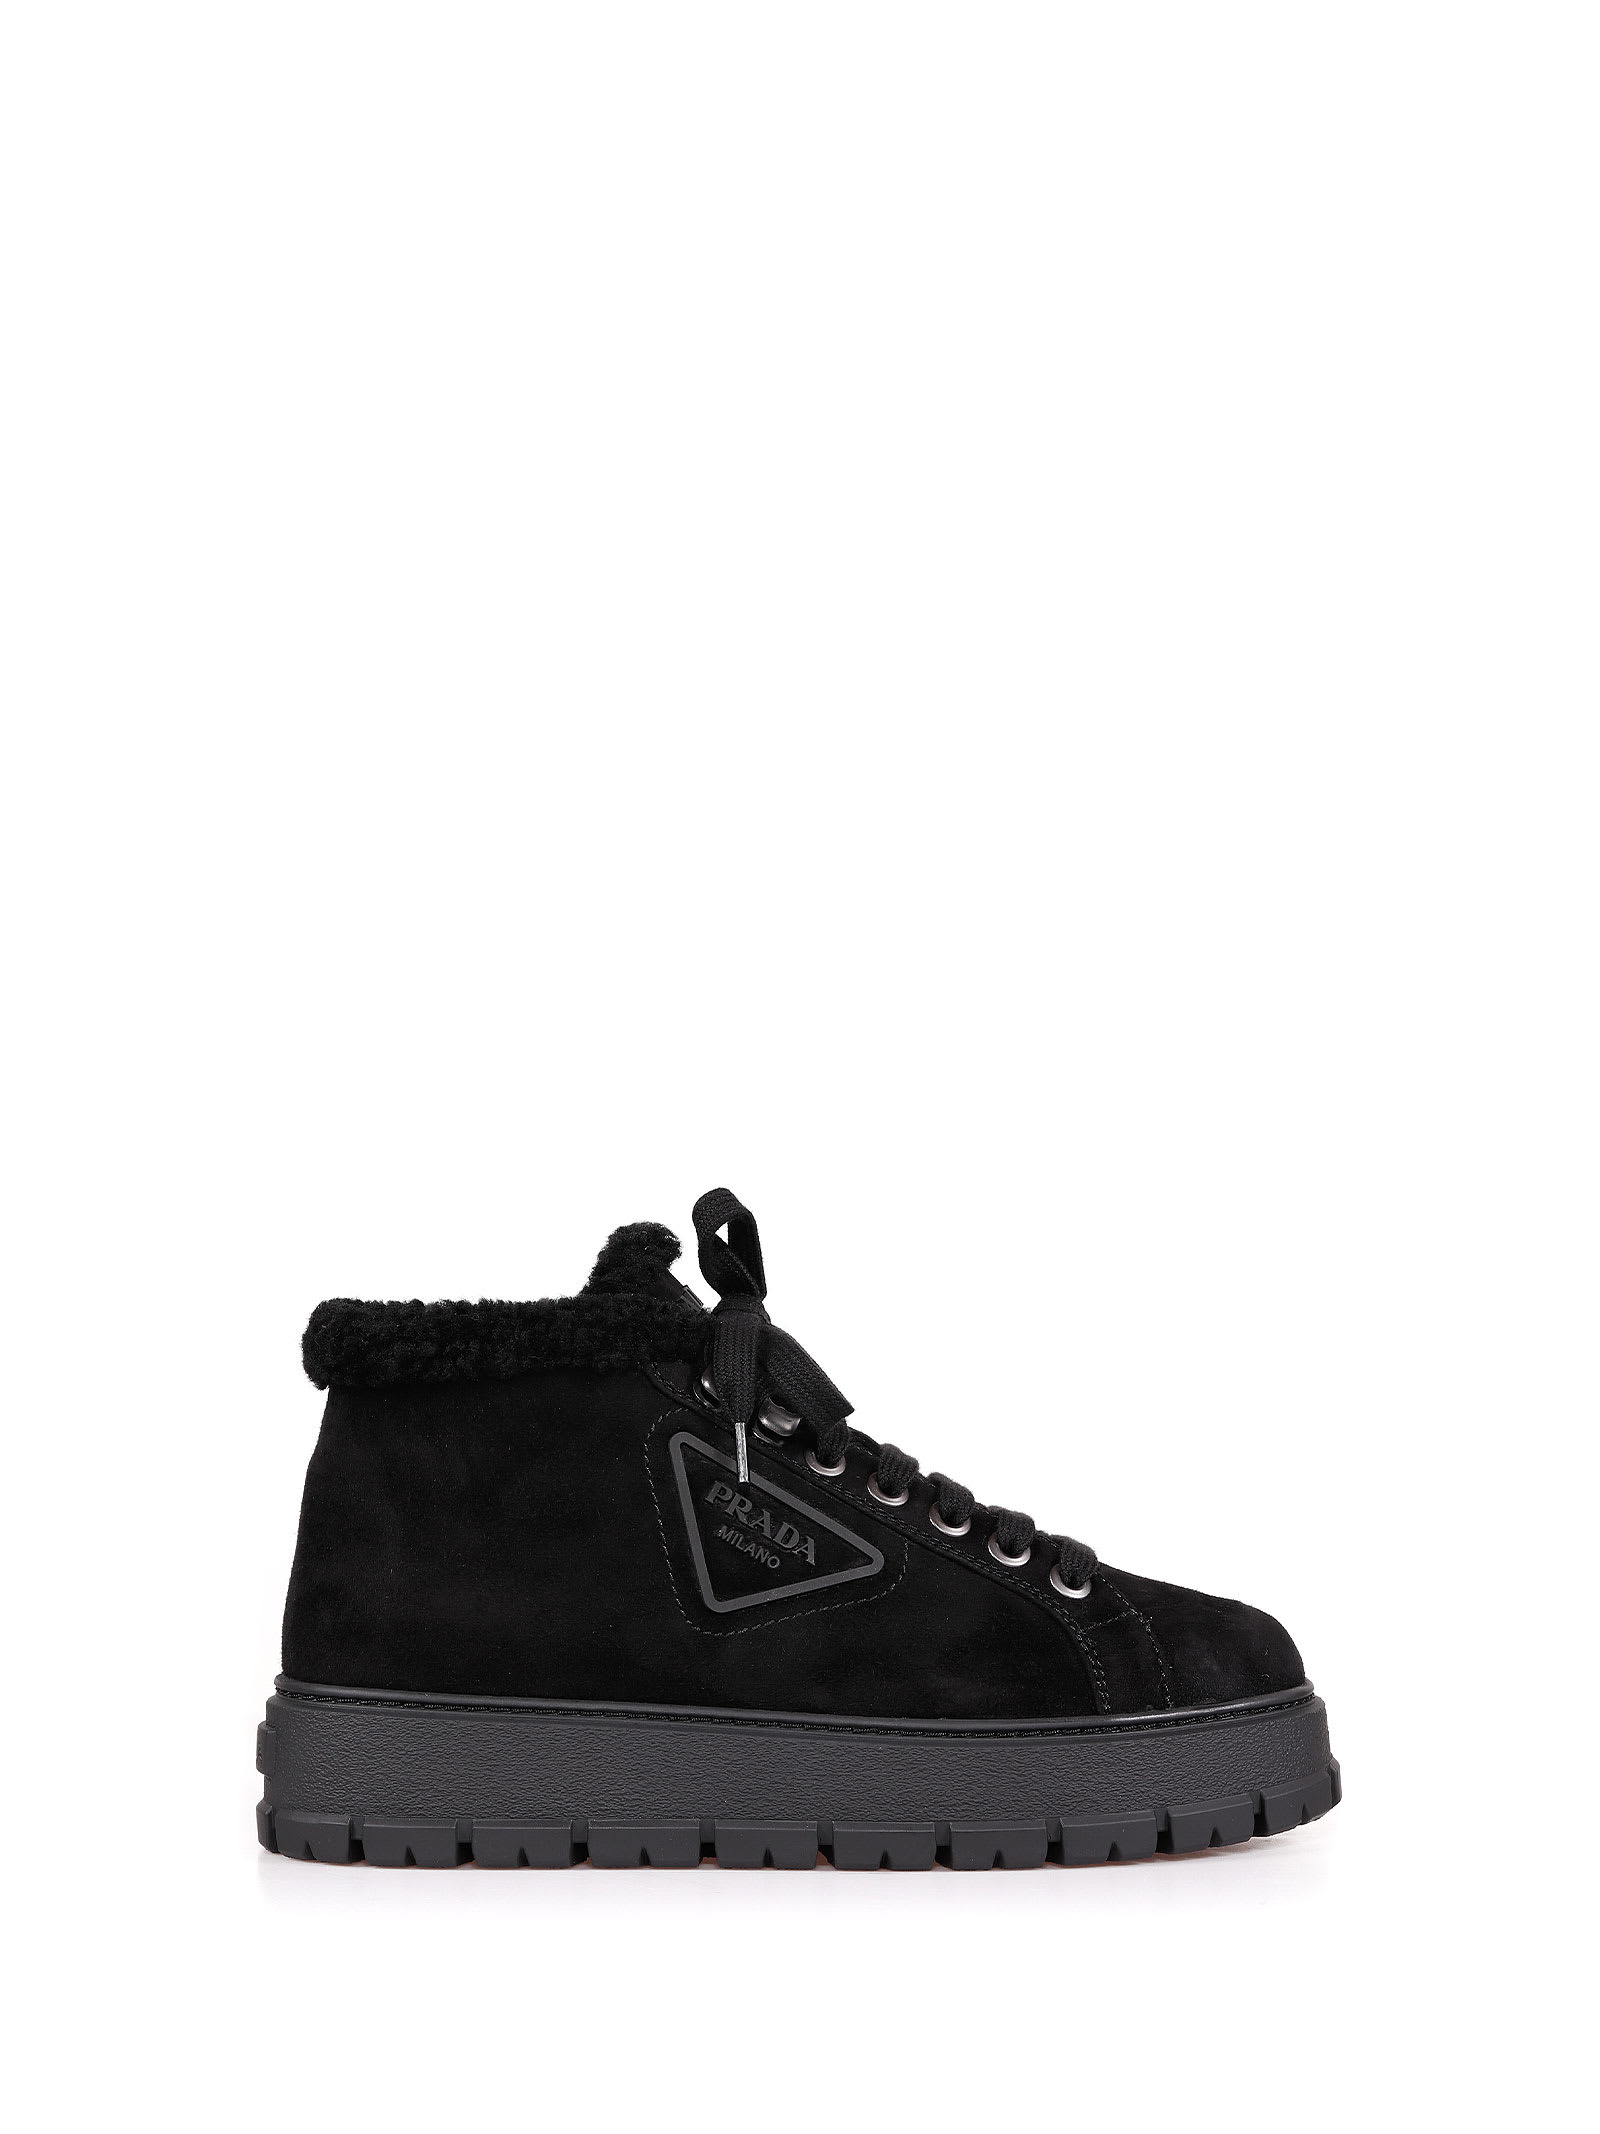 Prada Lace-up Suede Ankle Boot